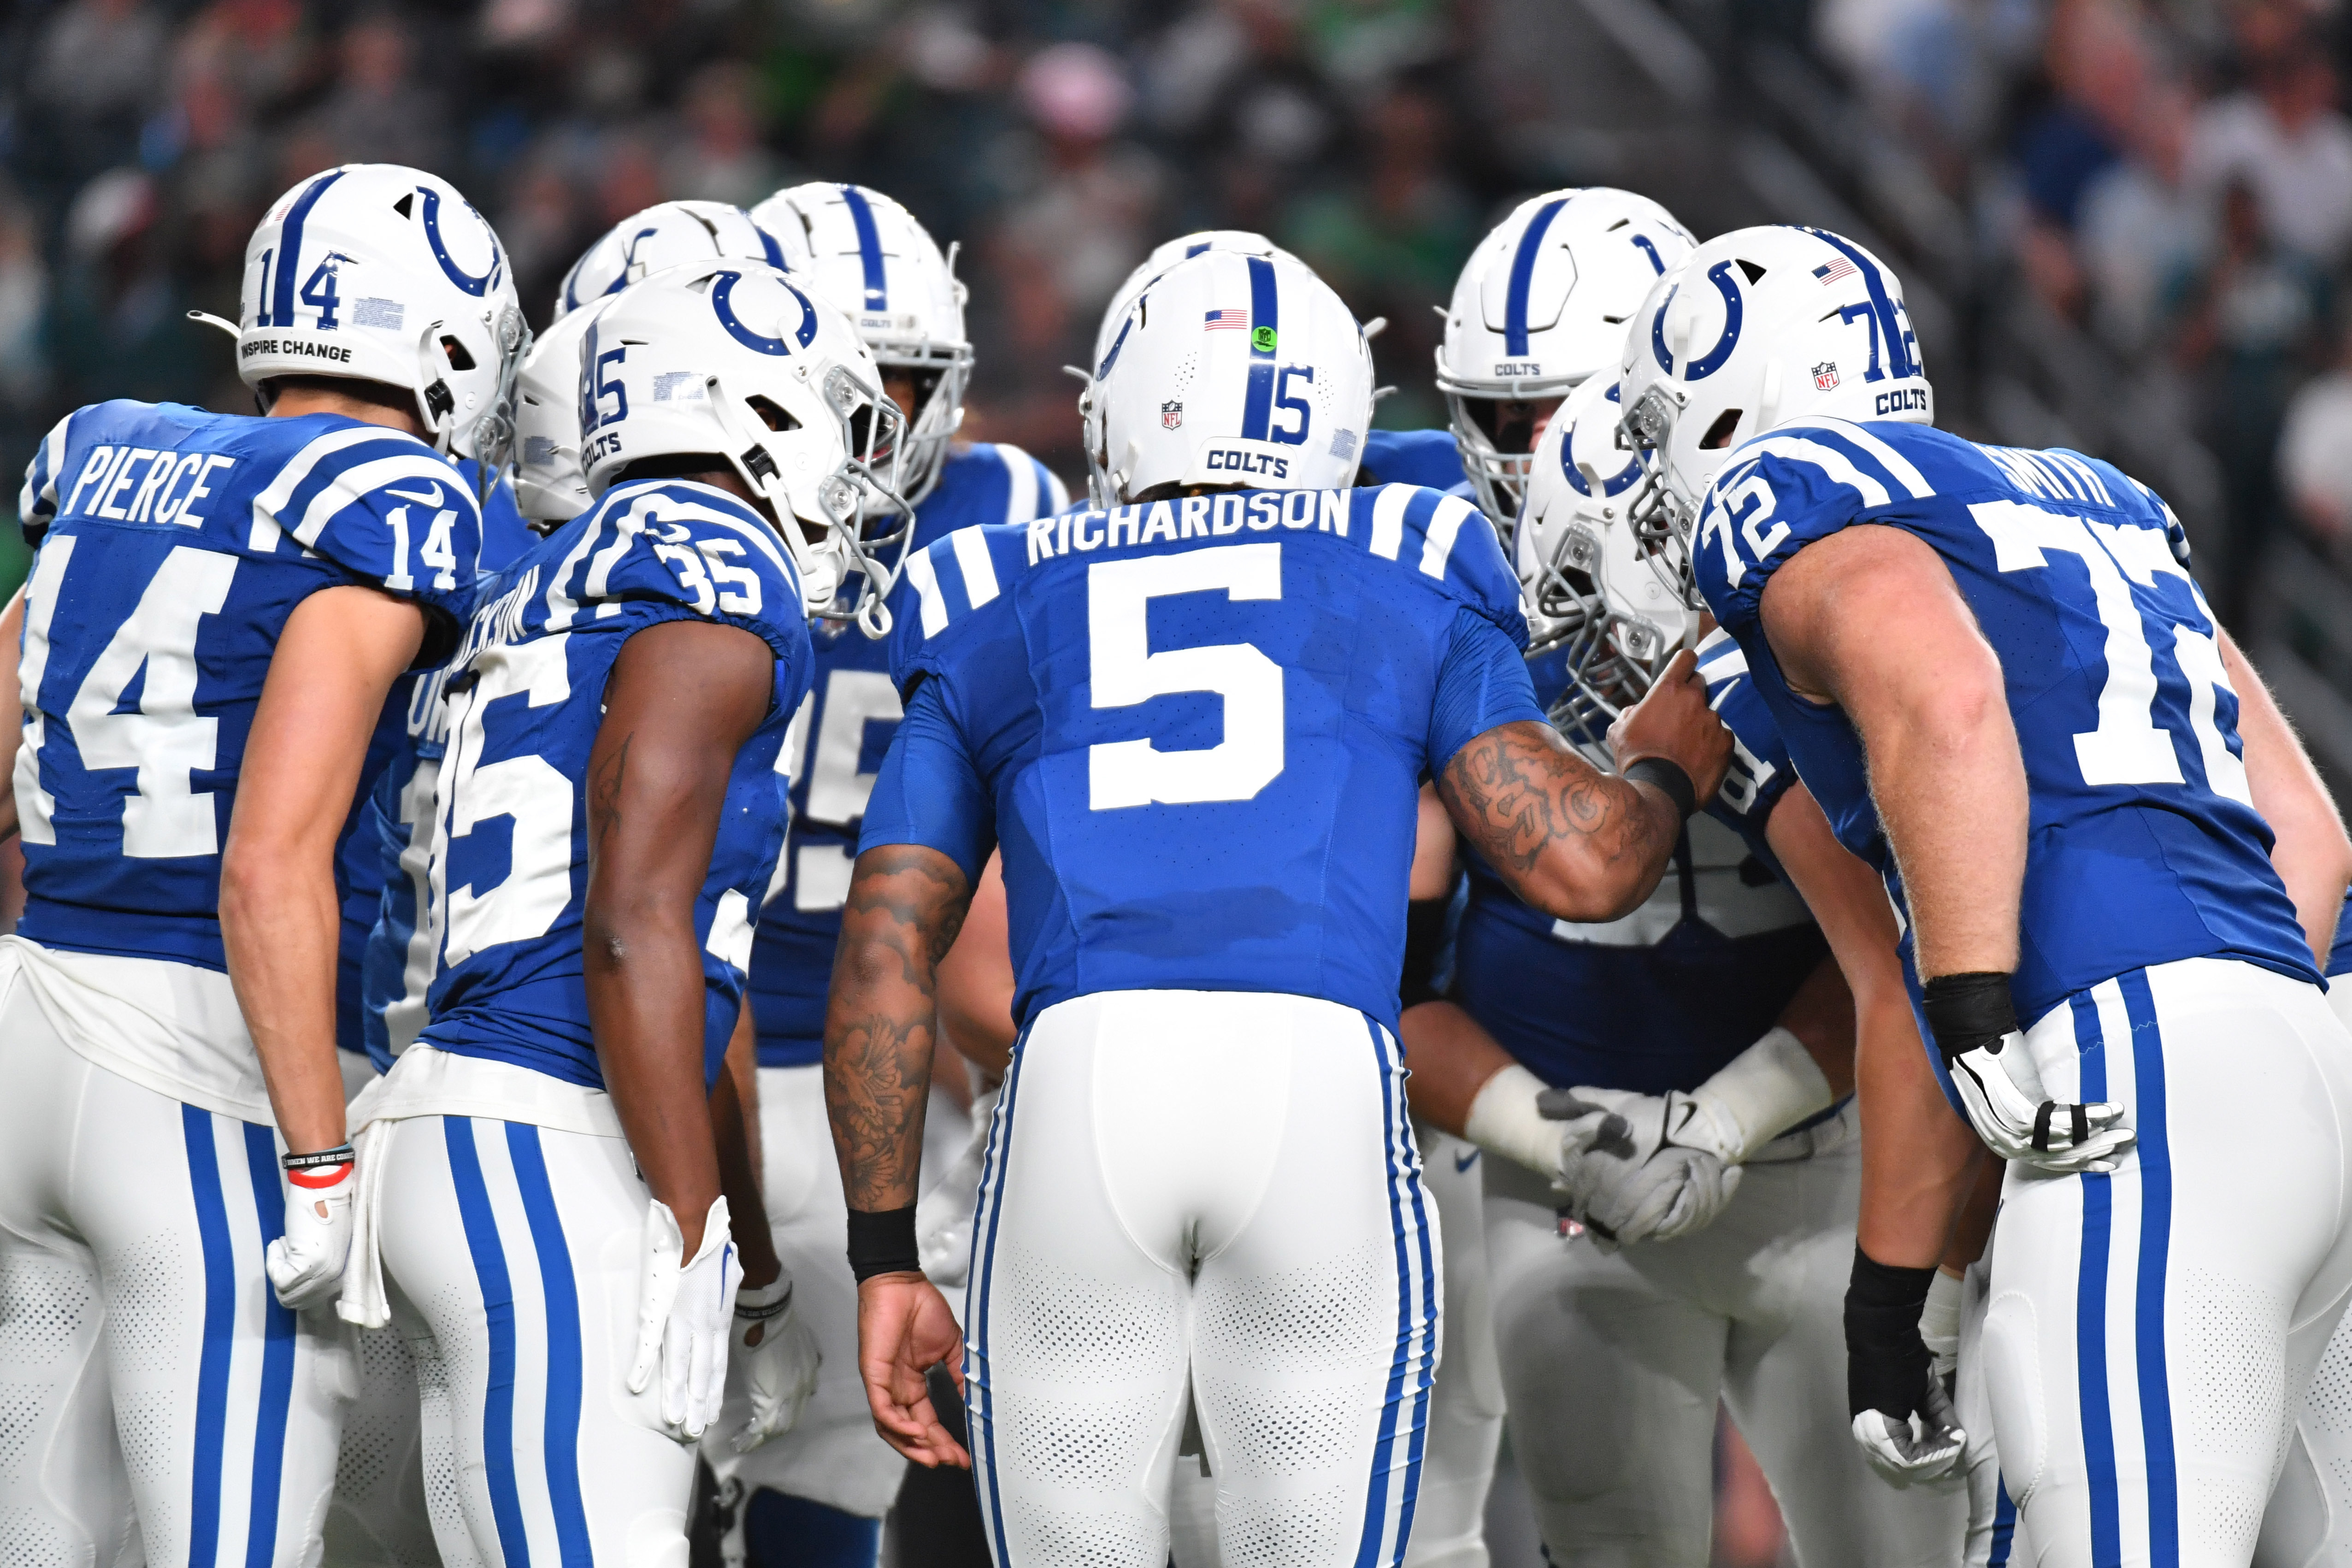 A huddle of Colts players lean in with their heads toward the center, with Anthony Richardson in the middle and his name printed across the back of his jersey